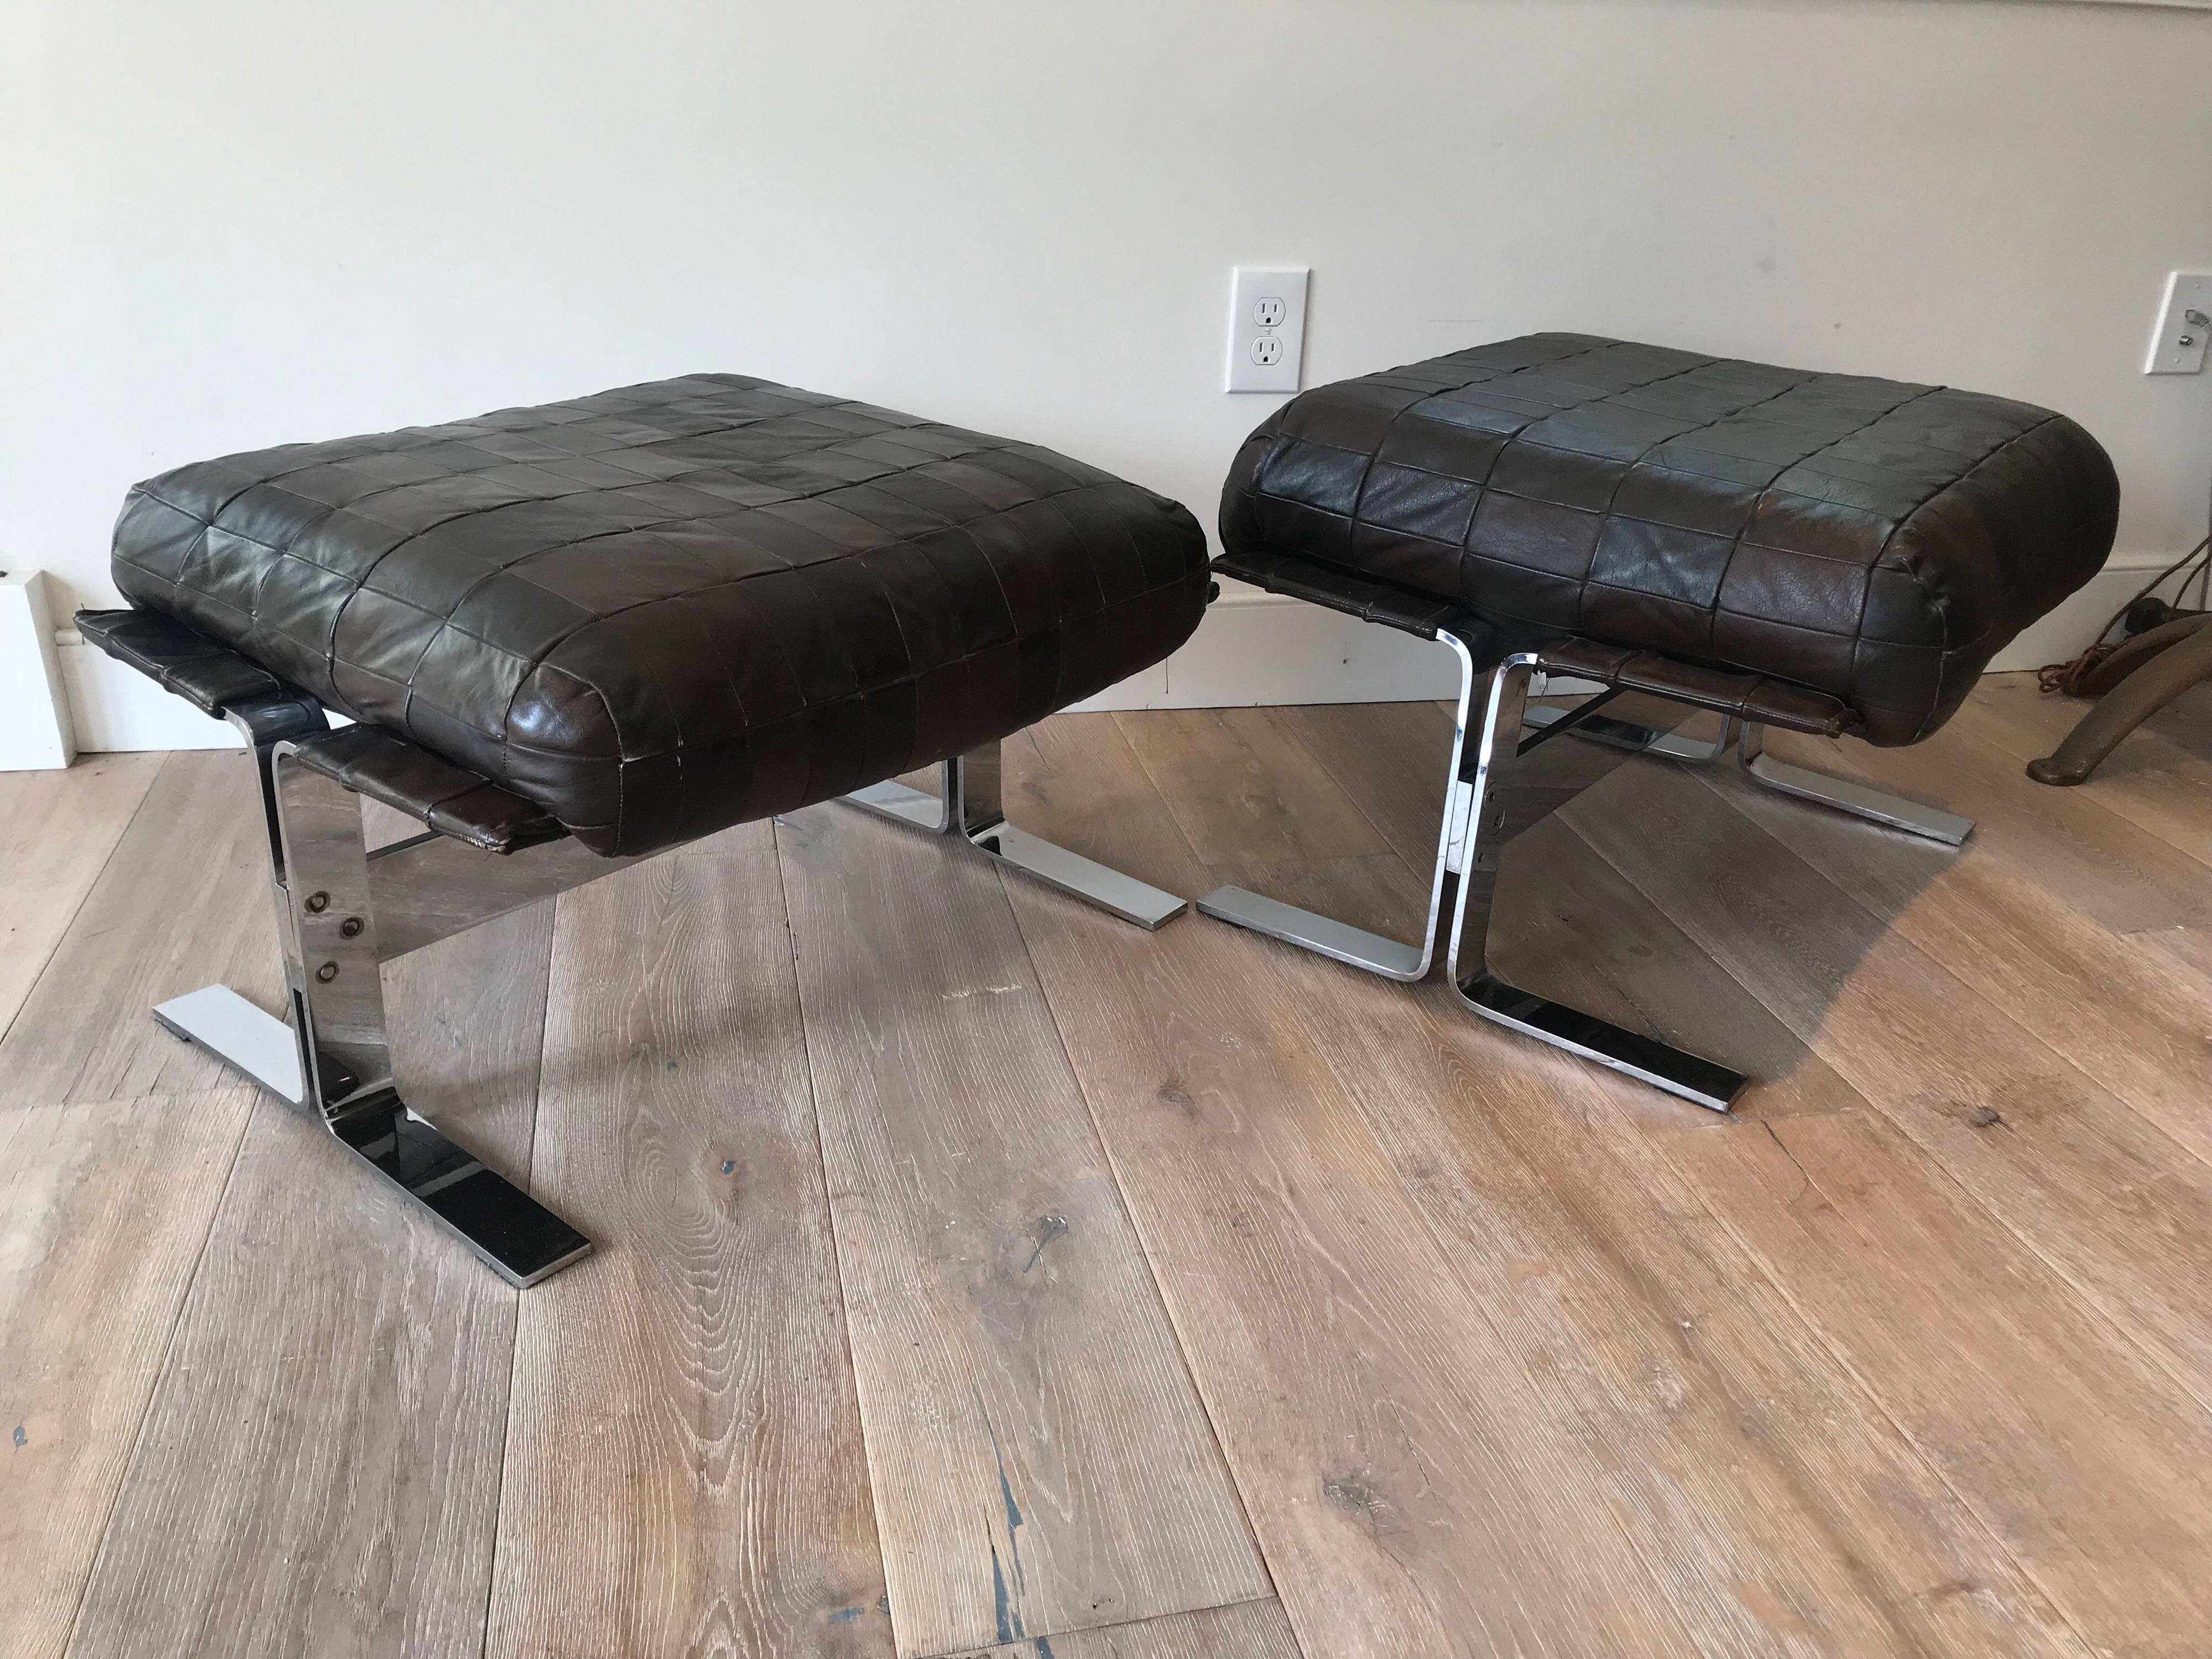 Pair of Chrome and Leather Ottomans by Kipp Stewart for Pace (Moderne der Mitte des Jahrhunderts)